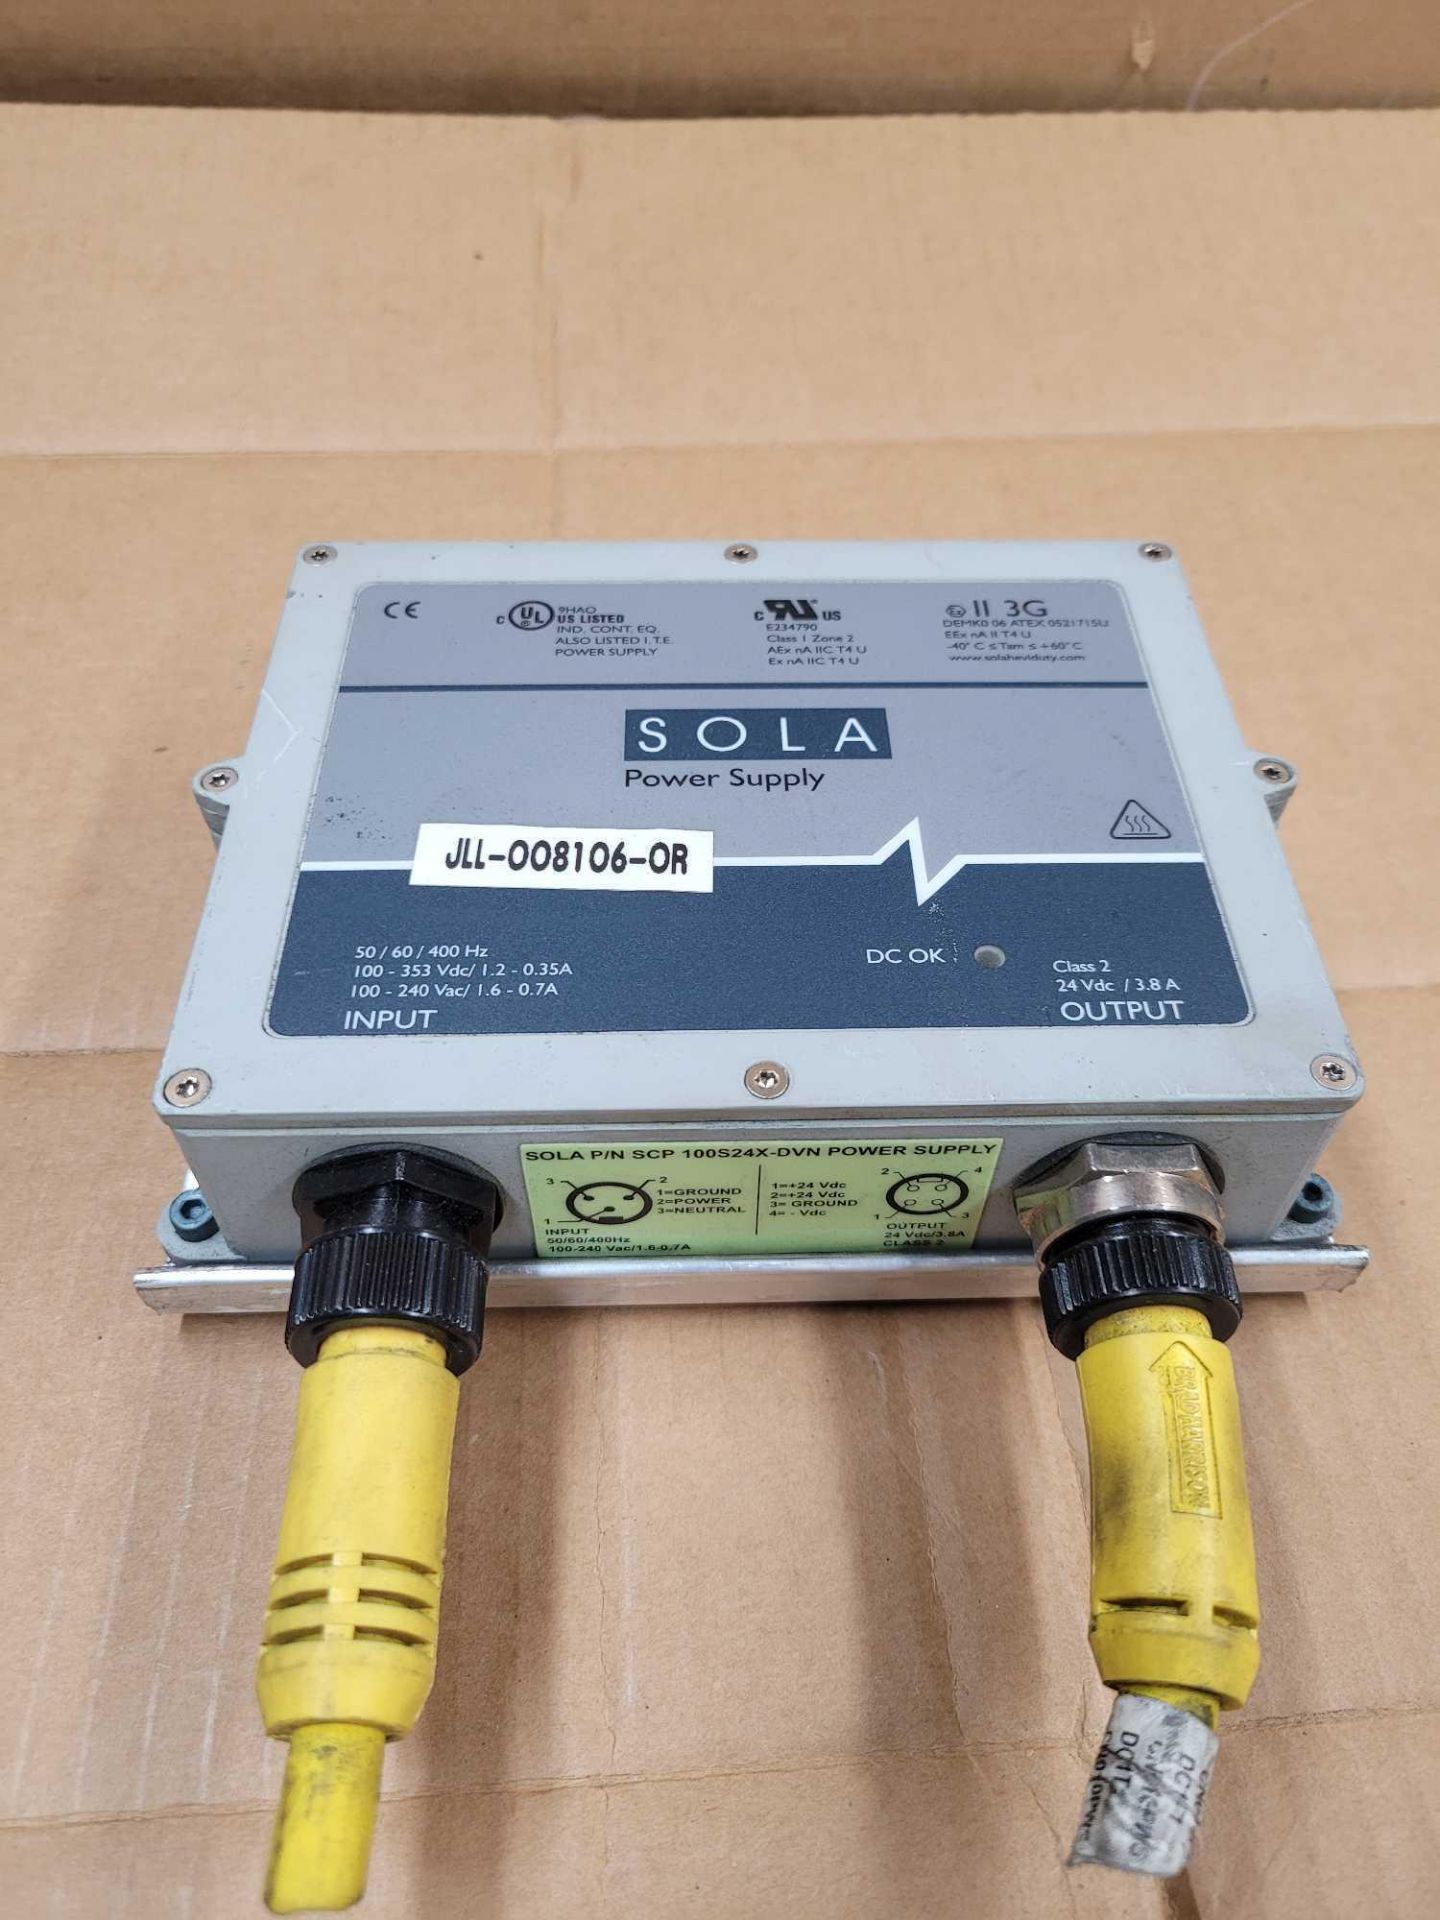 LOT OF 4 ASSORTED SOLA  /  (2) SCP 100S24X-DVN | Power Supply  /  (2) SCP 100S24X-CP | Power Supply - Image 2 of 7